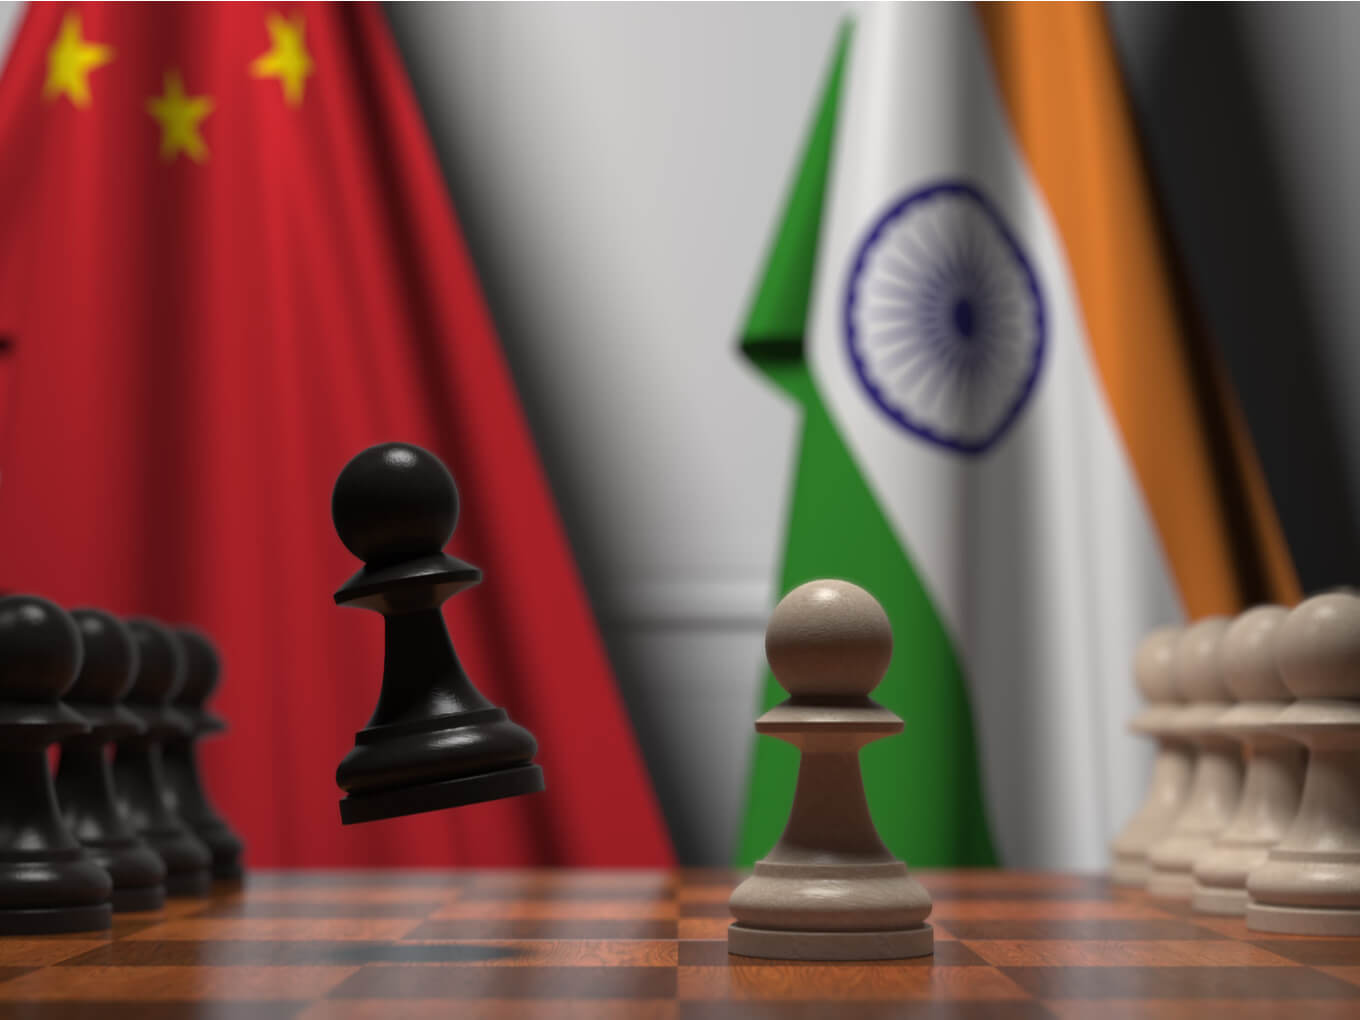 can india's gaming startups leapfrog chinese rivals after the ban?